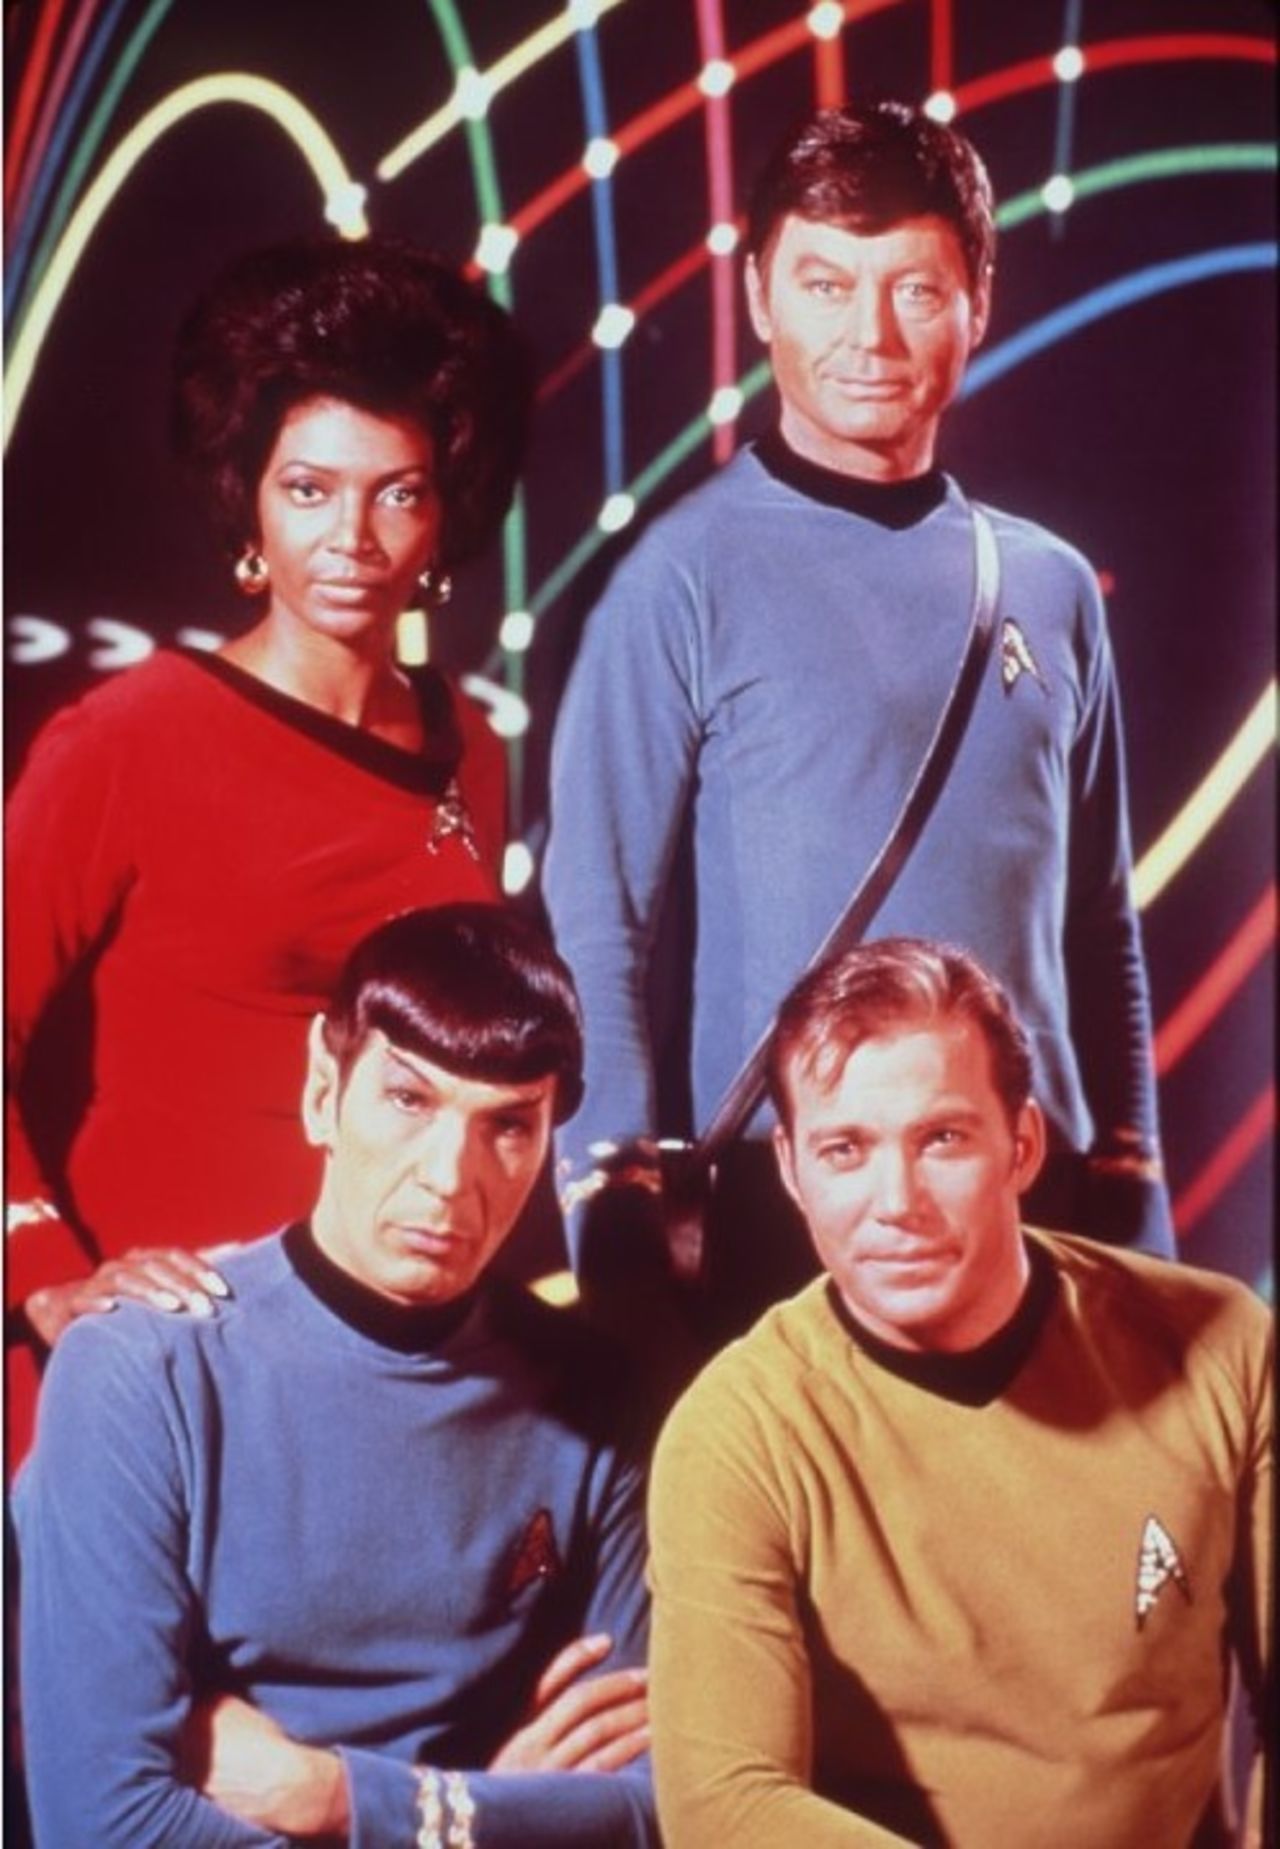 Leonard Nimoy, William Shatner, DeForest Kelley and Nichelle Nichols, from the original Star Trek series. Dr. McCoy, top right, is carrying that show's version of the Tricorder.